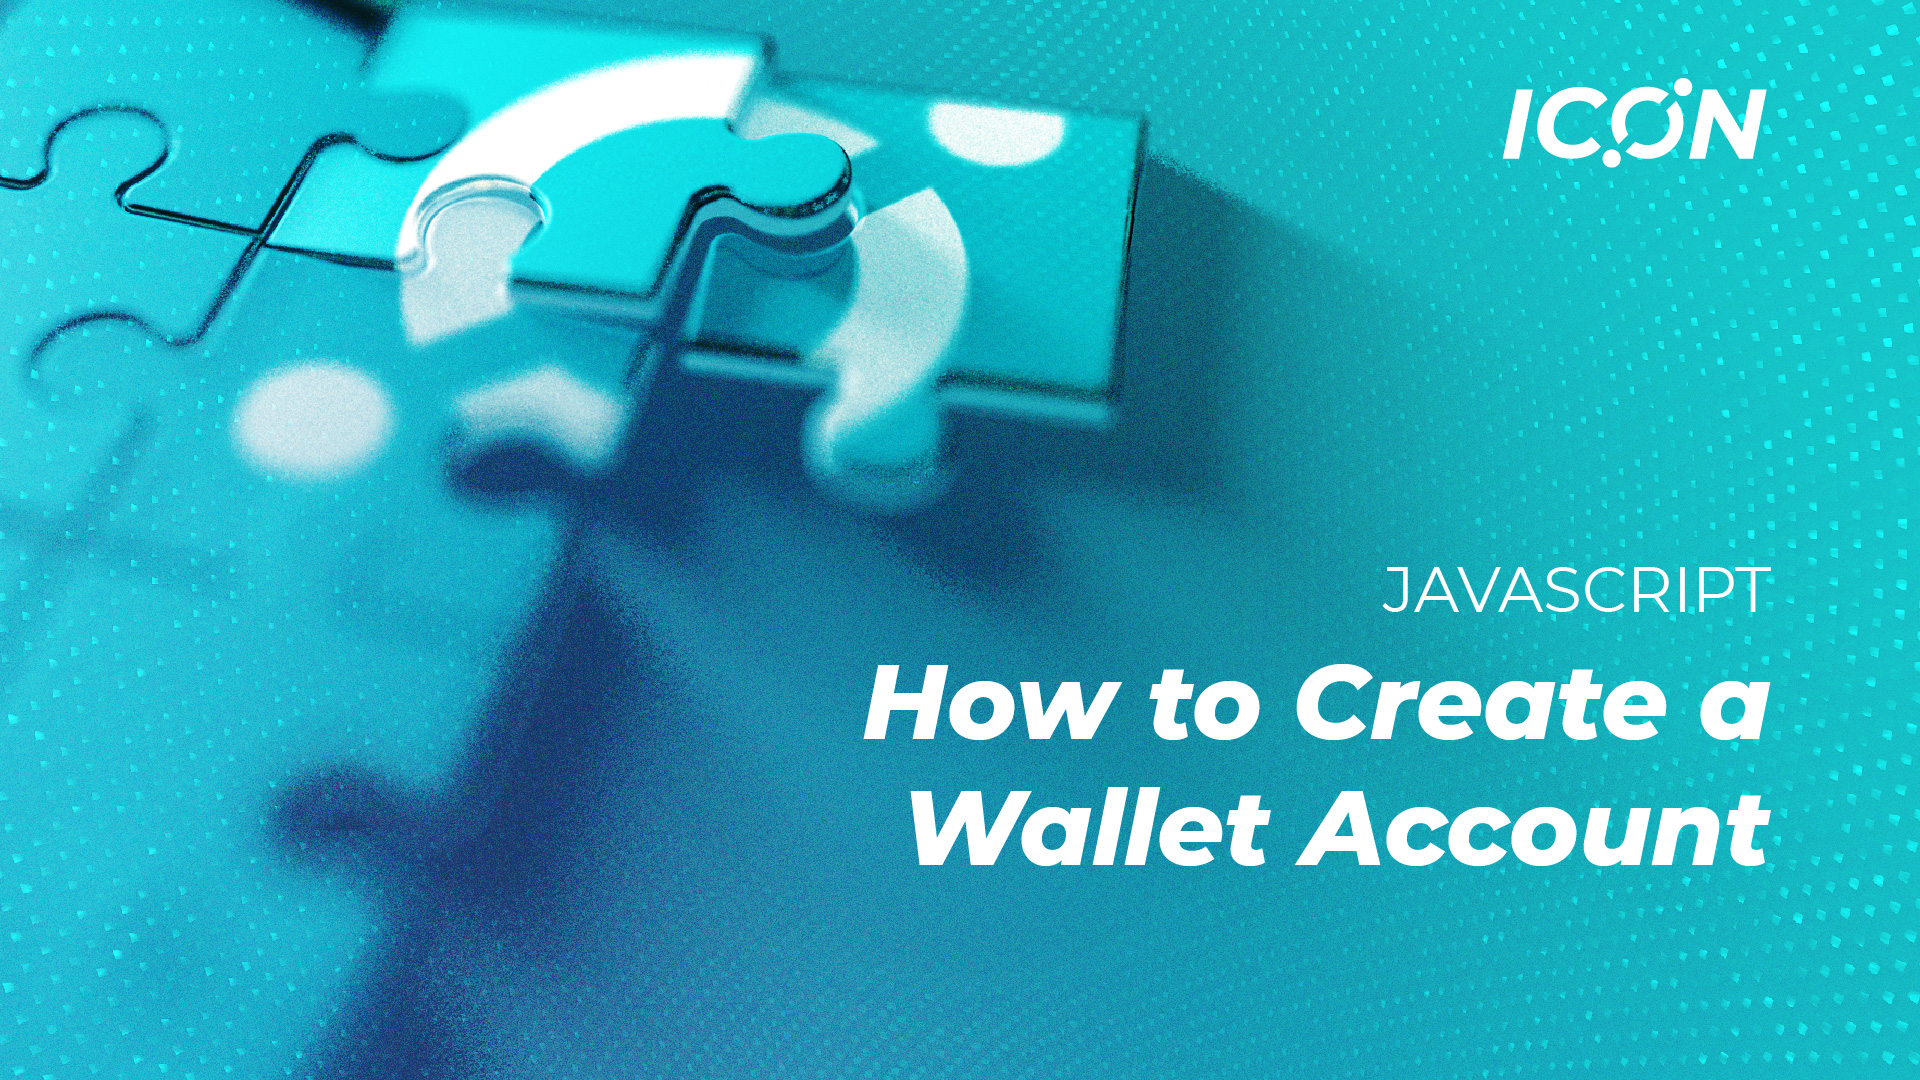 Learn how to create a wallet account on the ICON Blockchain